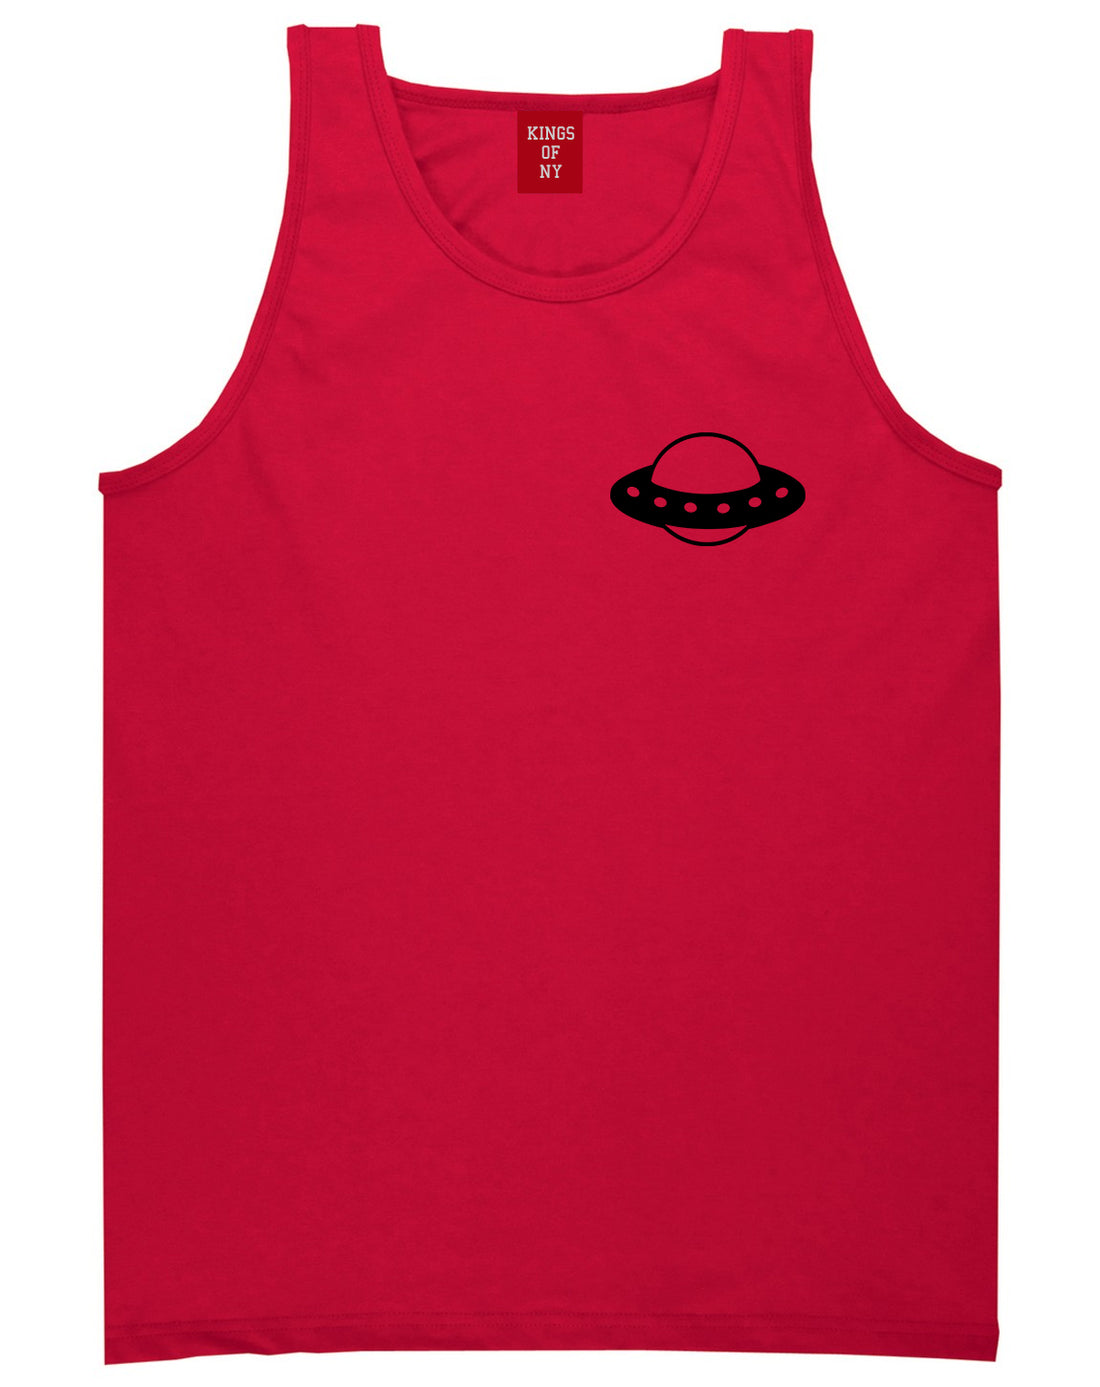 Spaceship_Chest Mens Red Tank Top Shirt by Kings Of NY